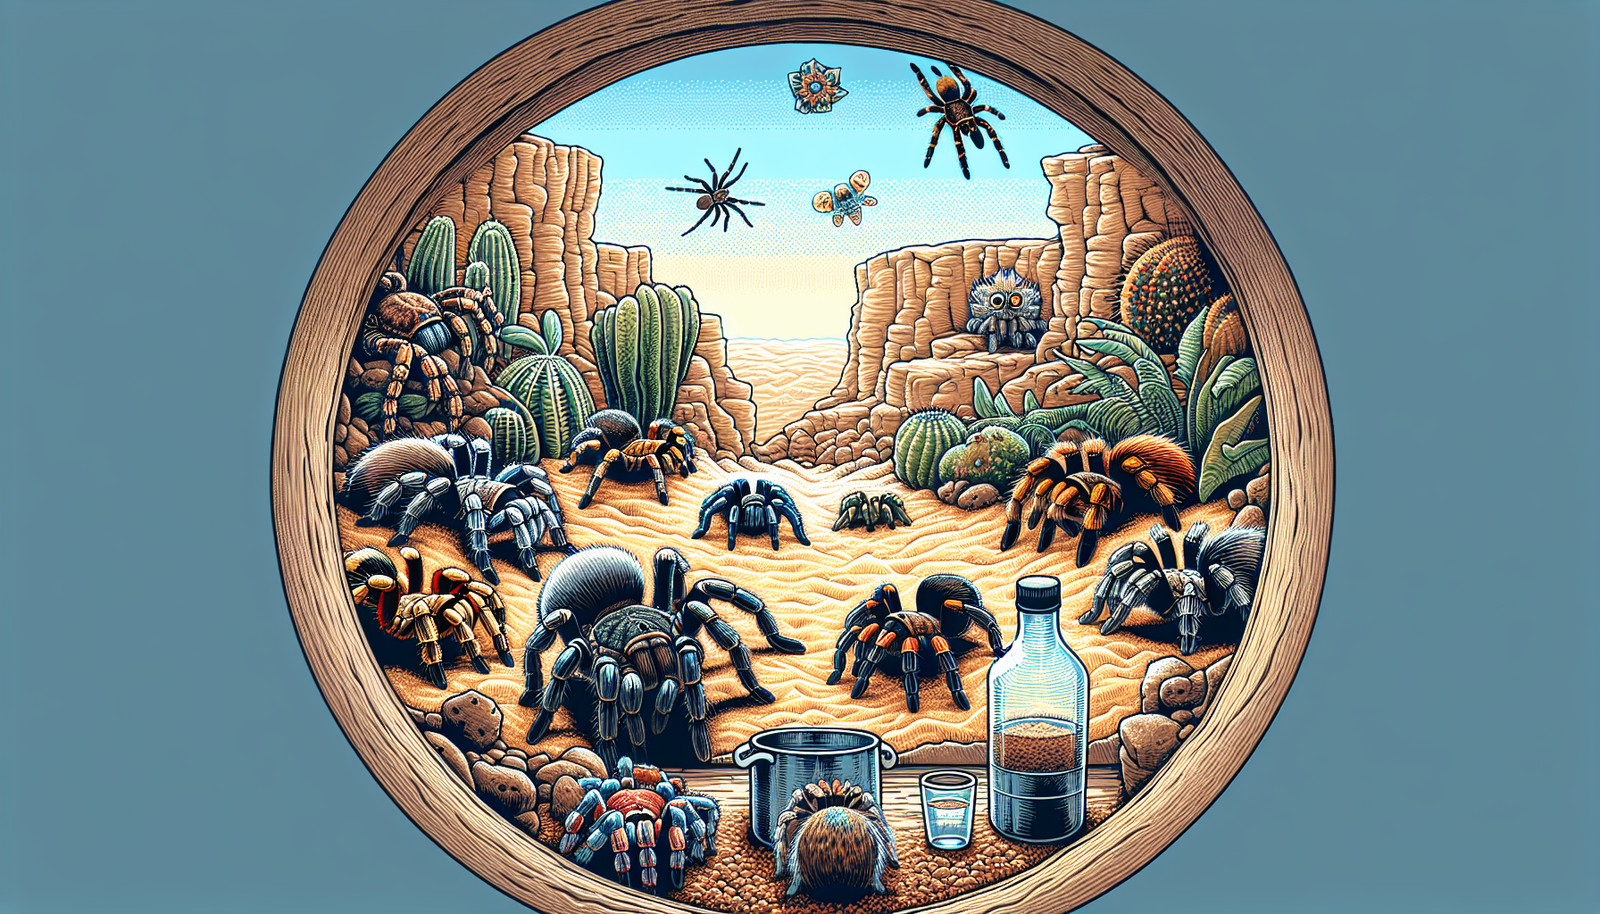 Can You Recommend Some Desert-dwelling Tarantula Varieties That Are Suitable For Captivity?